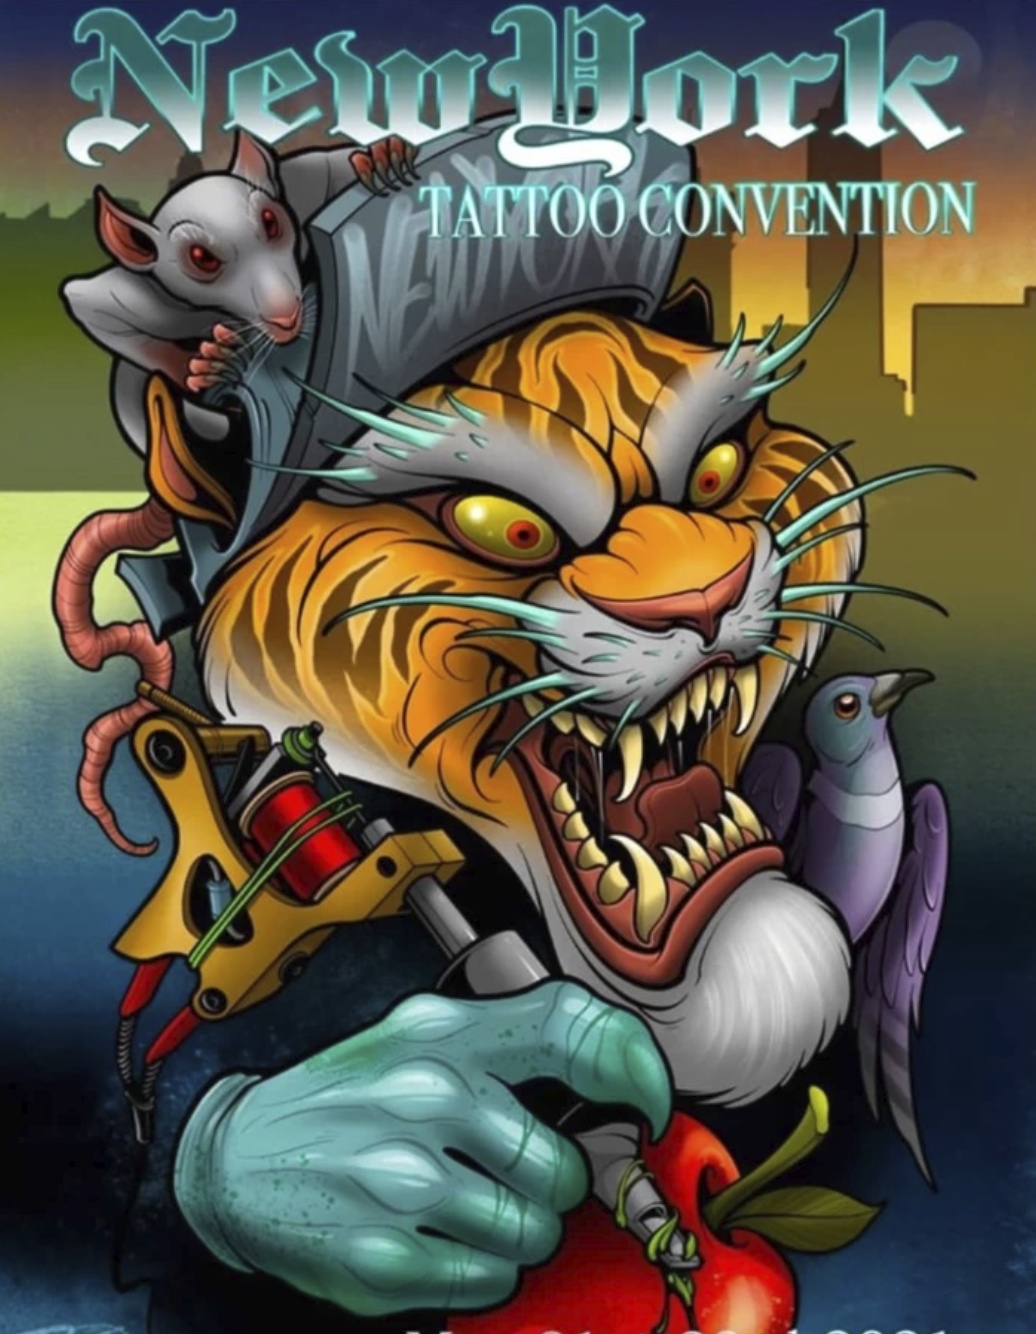 The New York Tattoo Convention